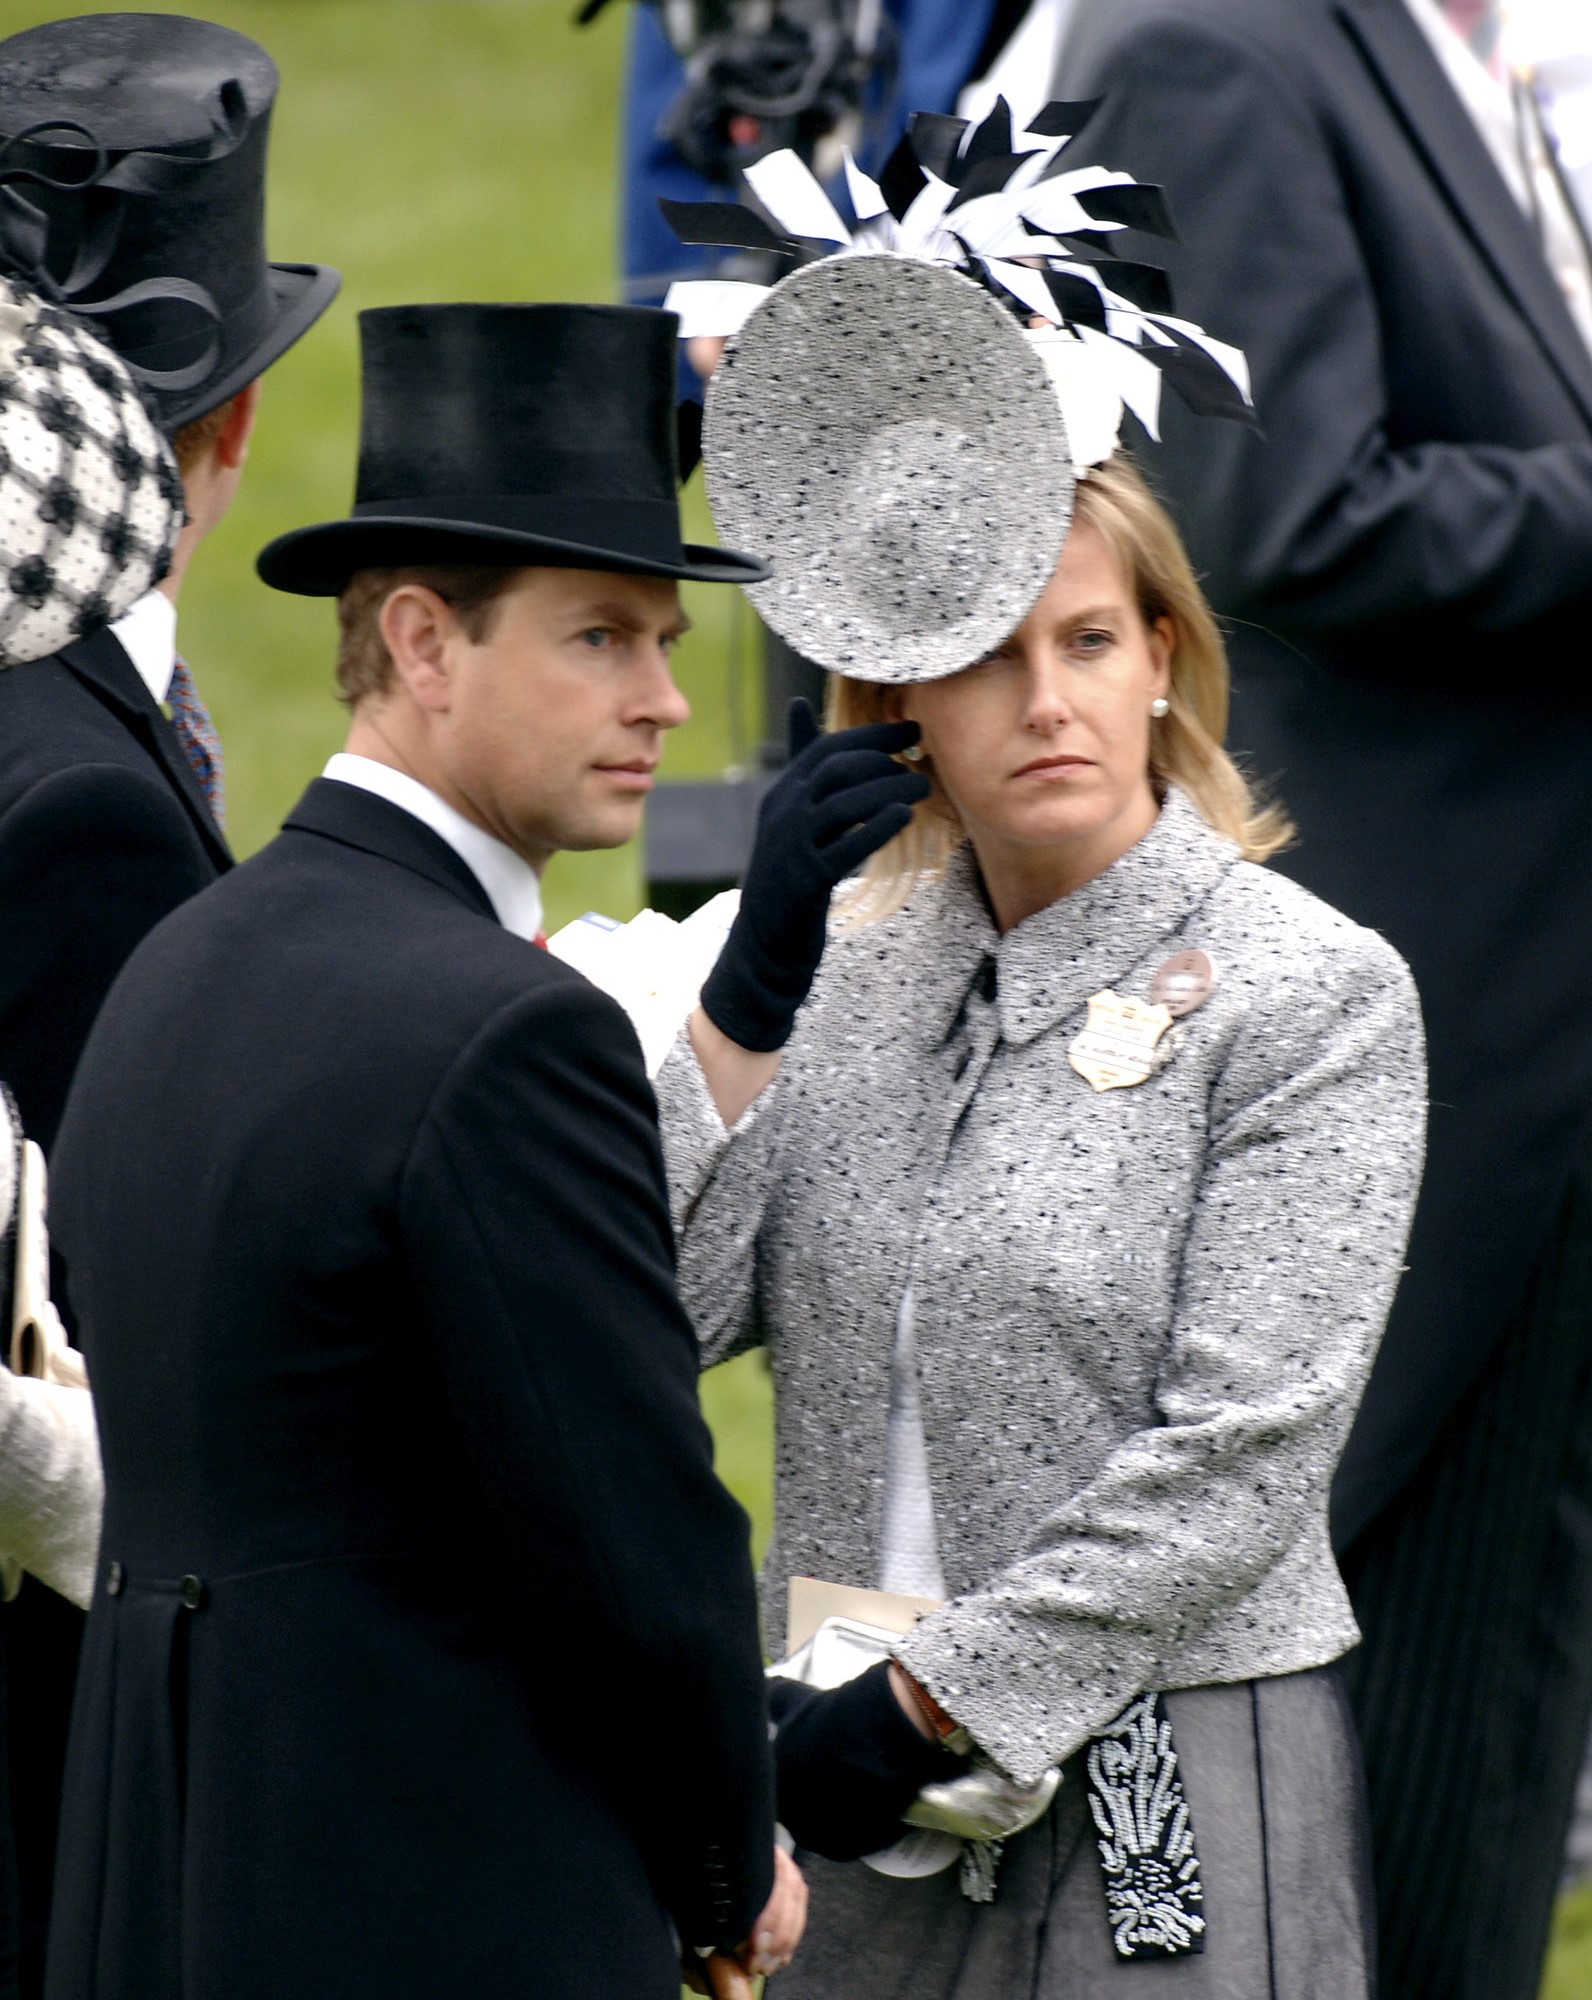 Prince Edward and Sophie, Countess of Wessex attending the Royal Ascot